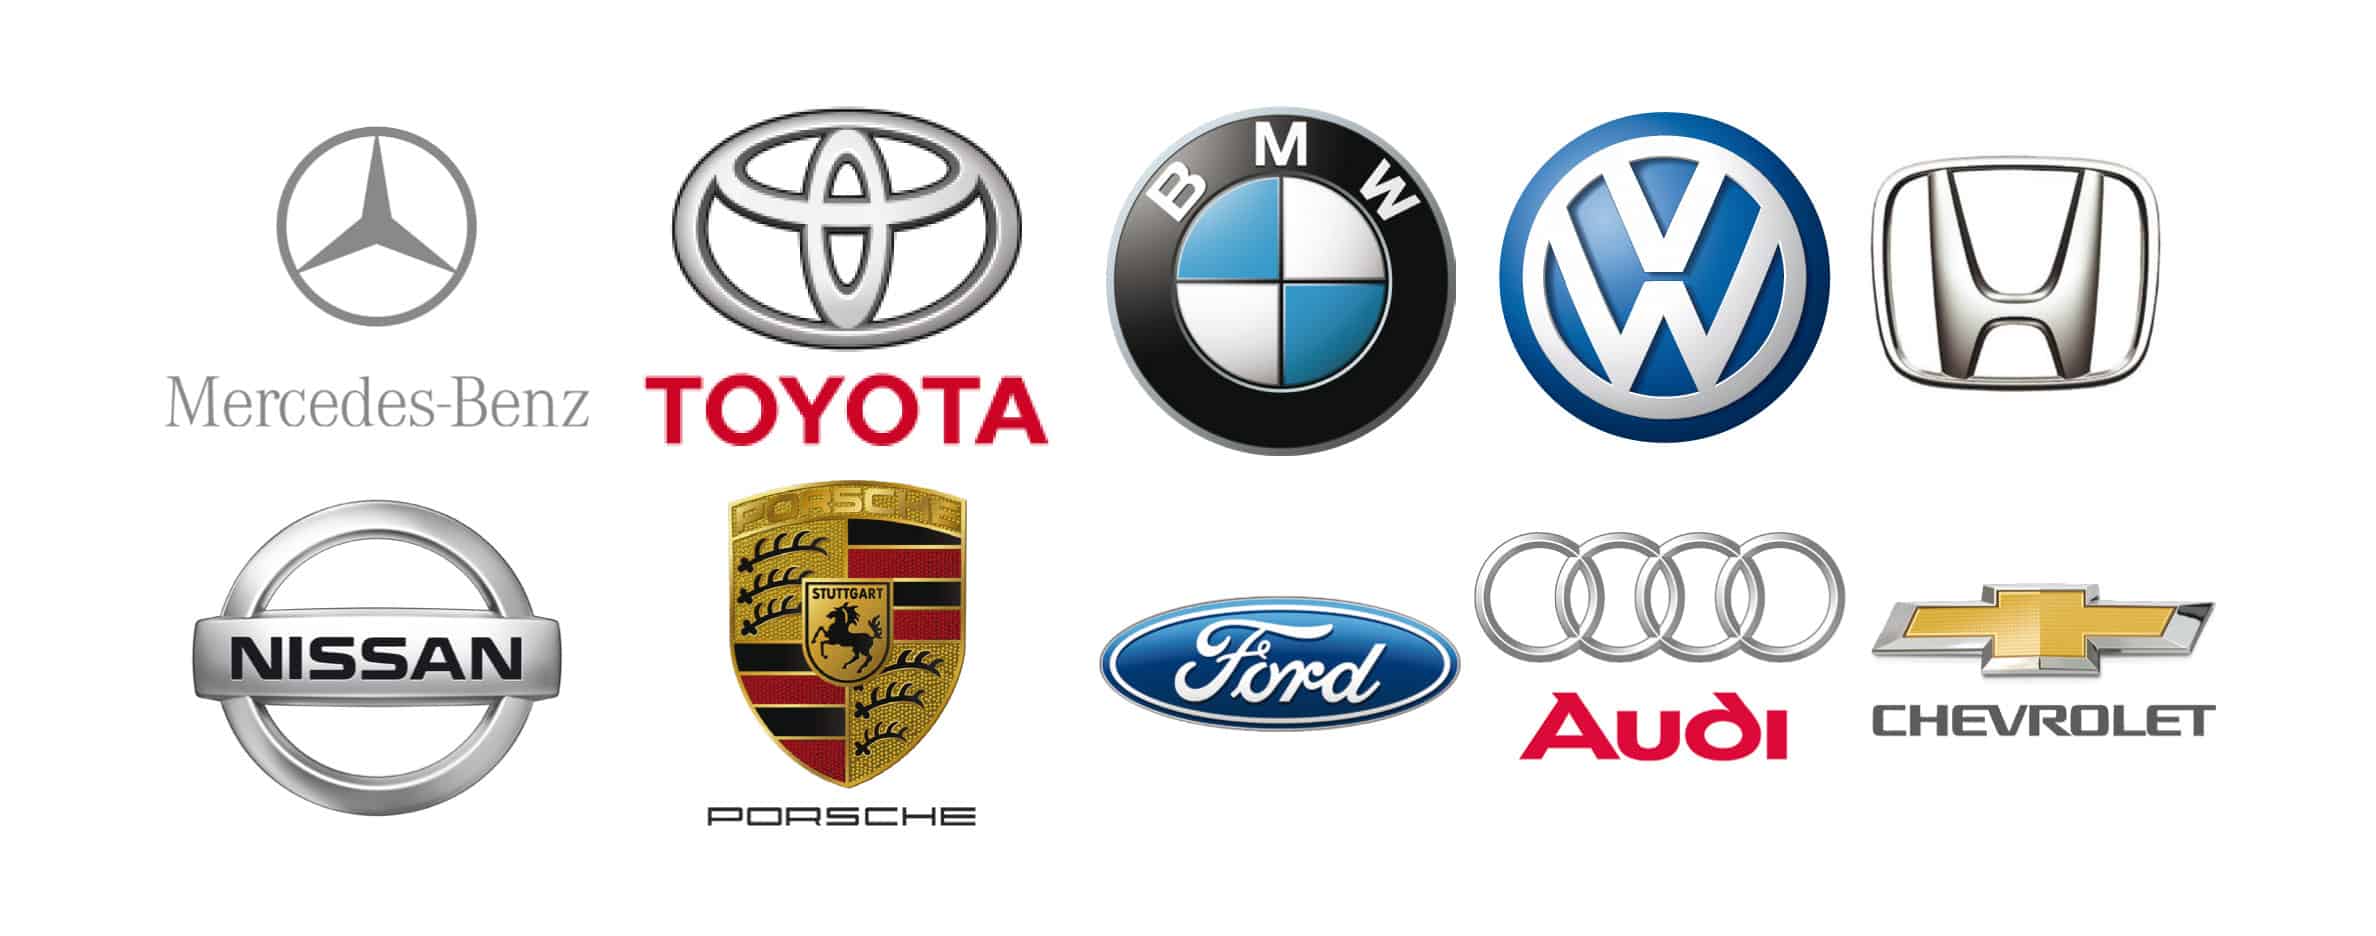 What Is The Best Luxury Car Brand